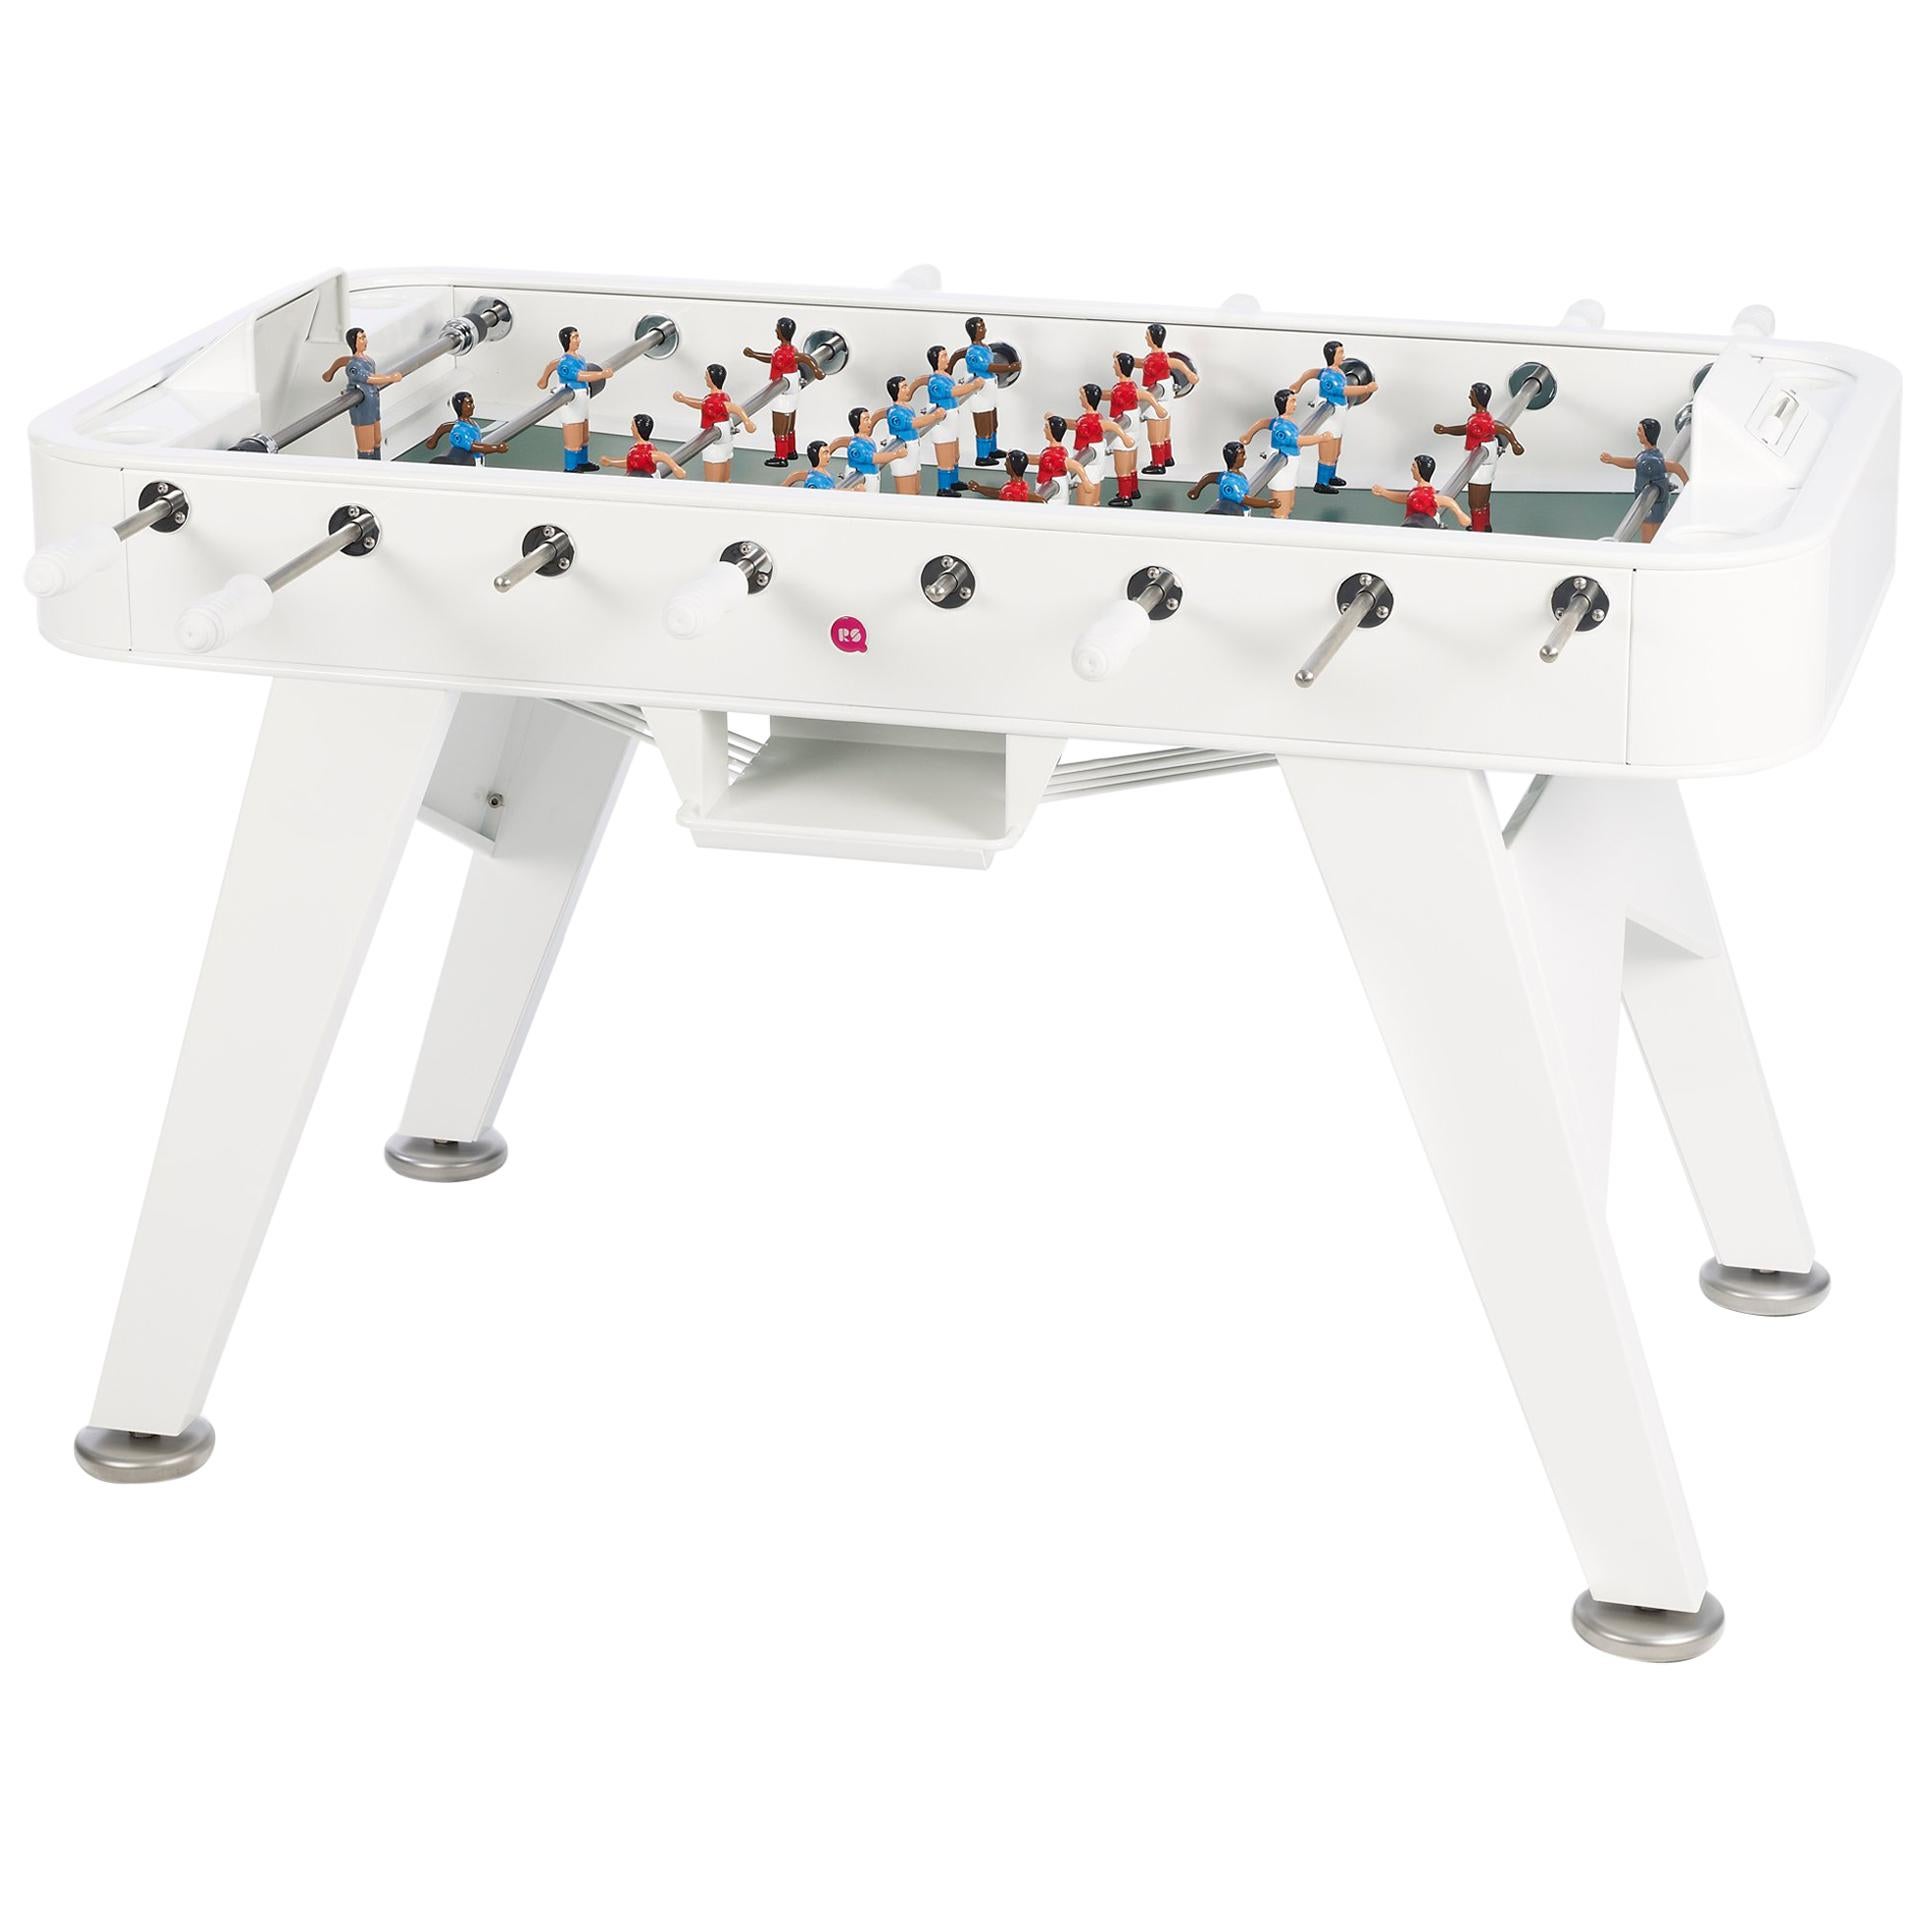 RS Barcelona RS2 Football Table in White Stainless Steel by Rafael Rodriguez